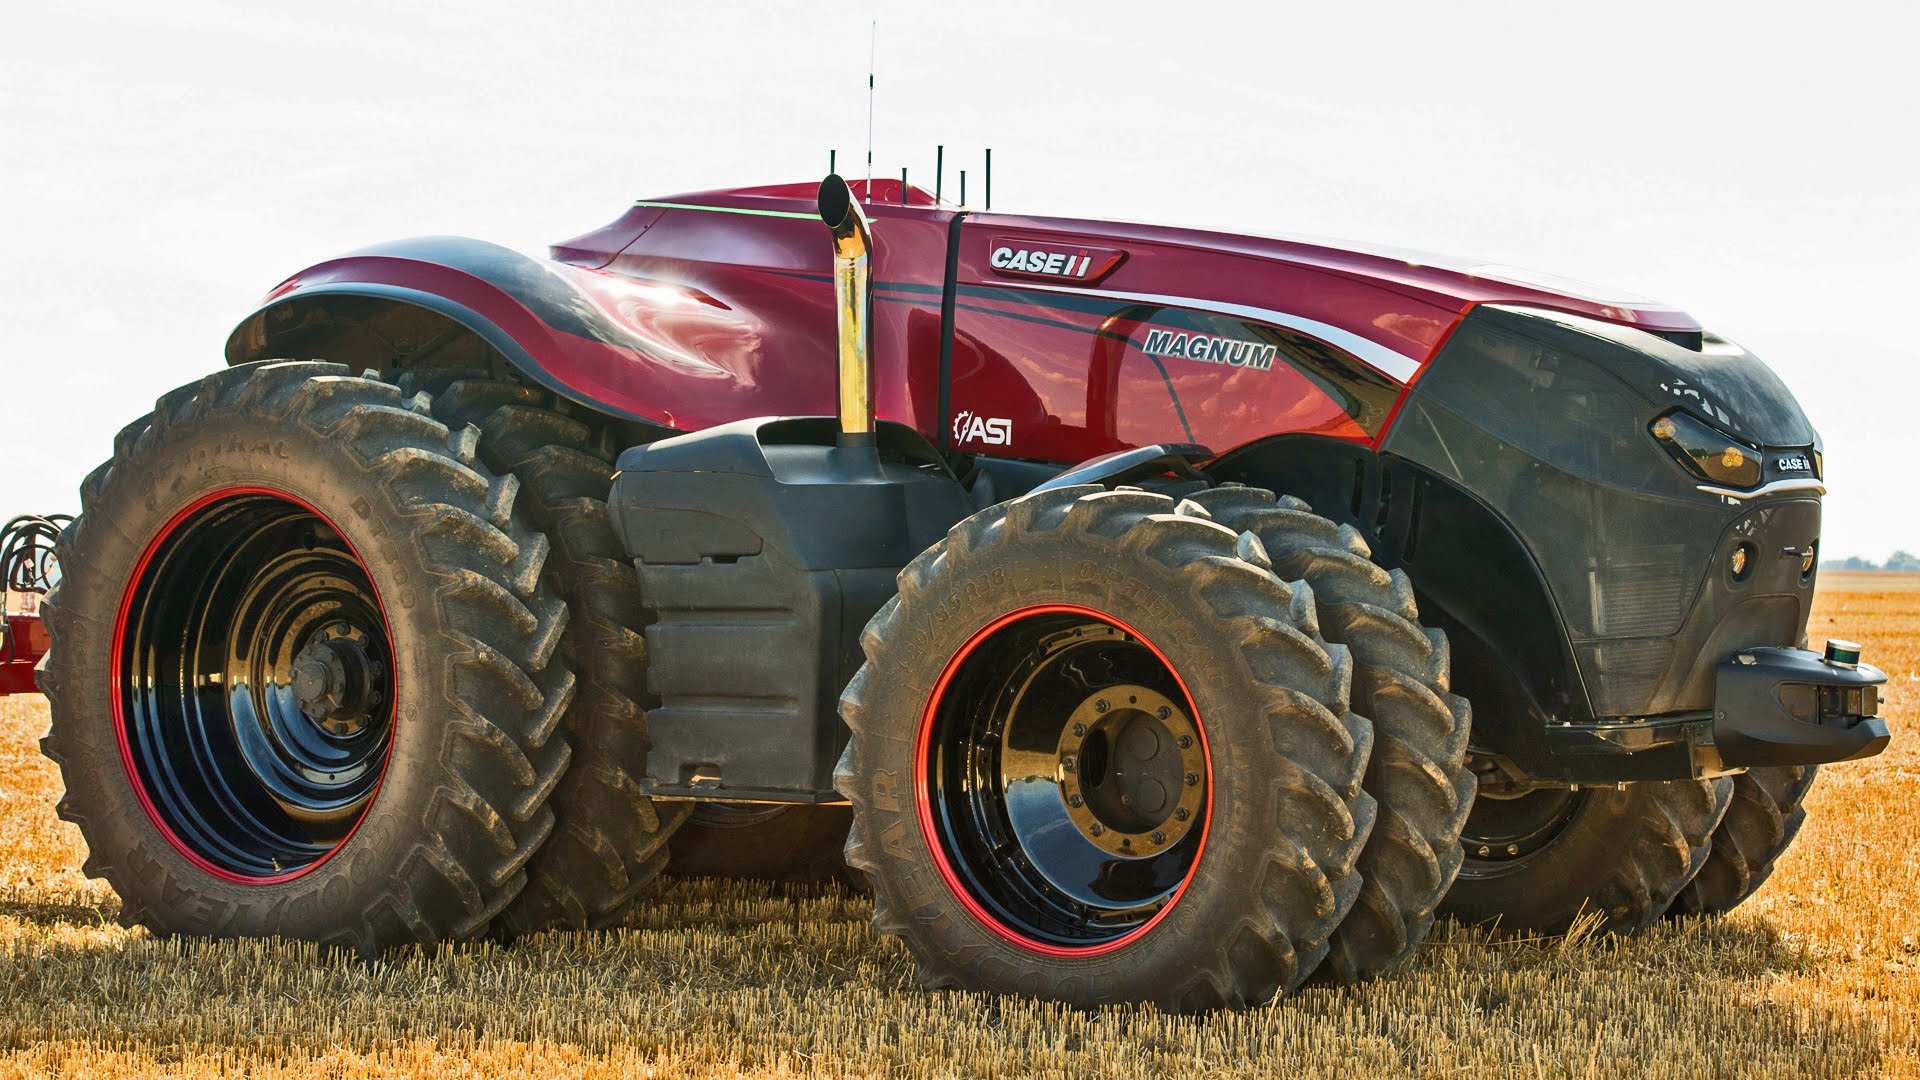 Leading tractor companies worldwide have already demonstrated master-slave or ‘follow-me’ unmanned autonomous tractors